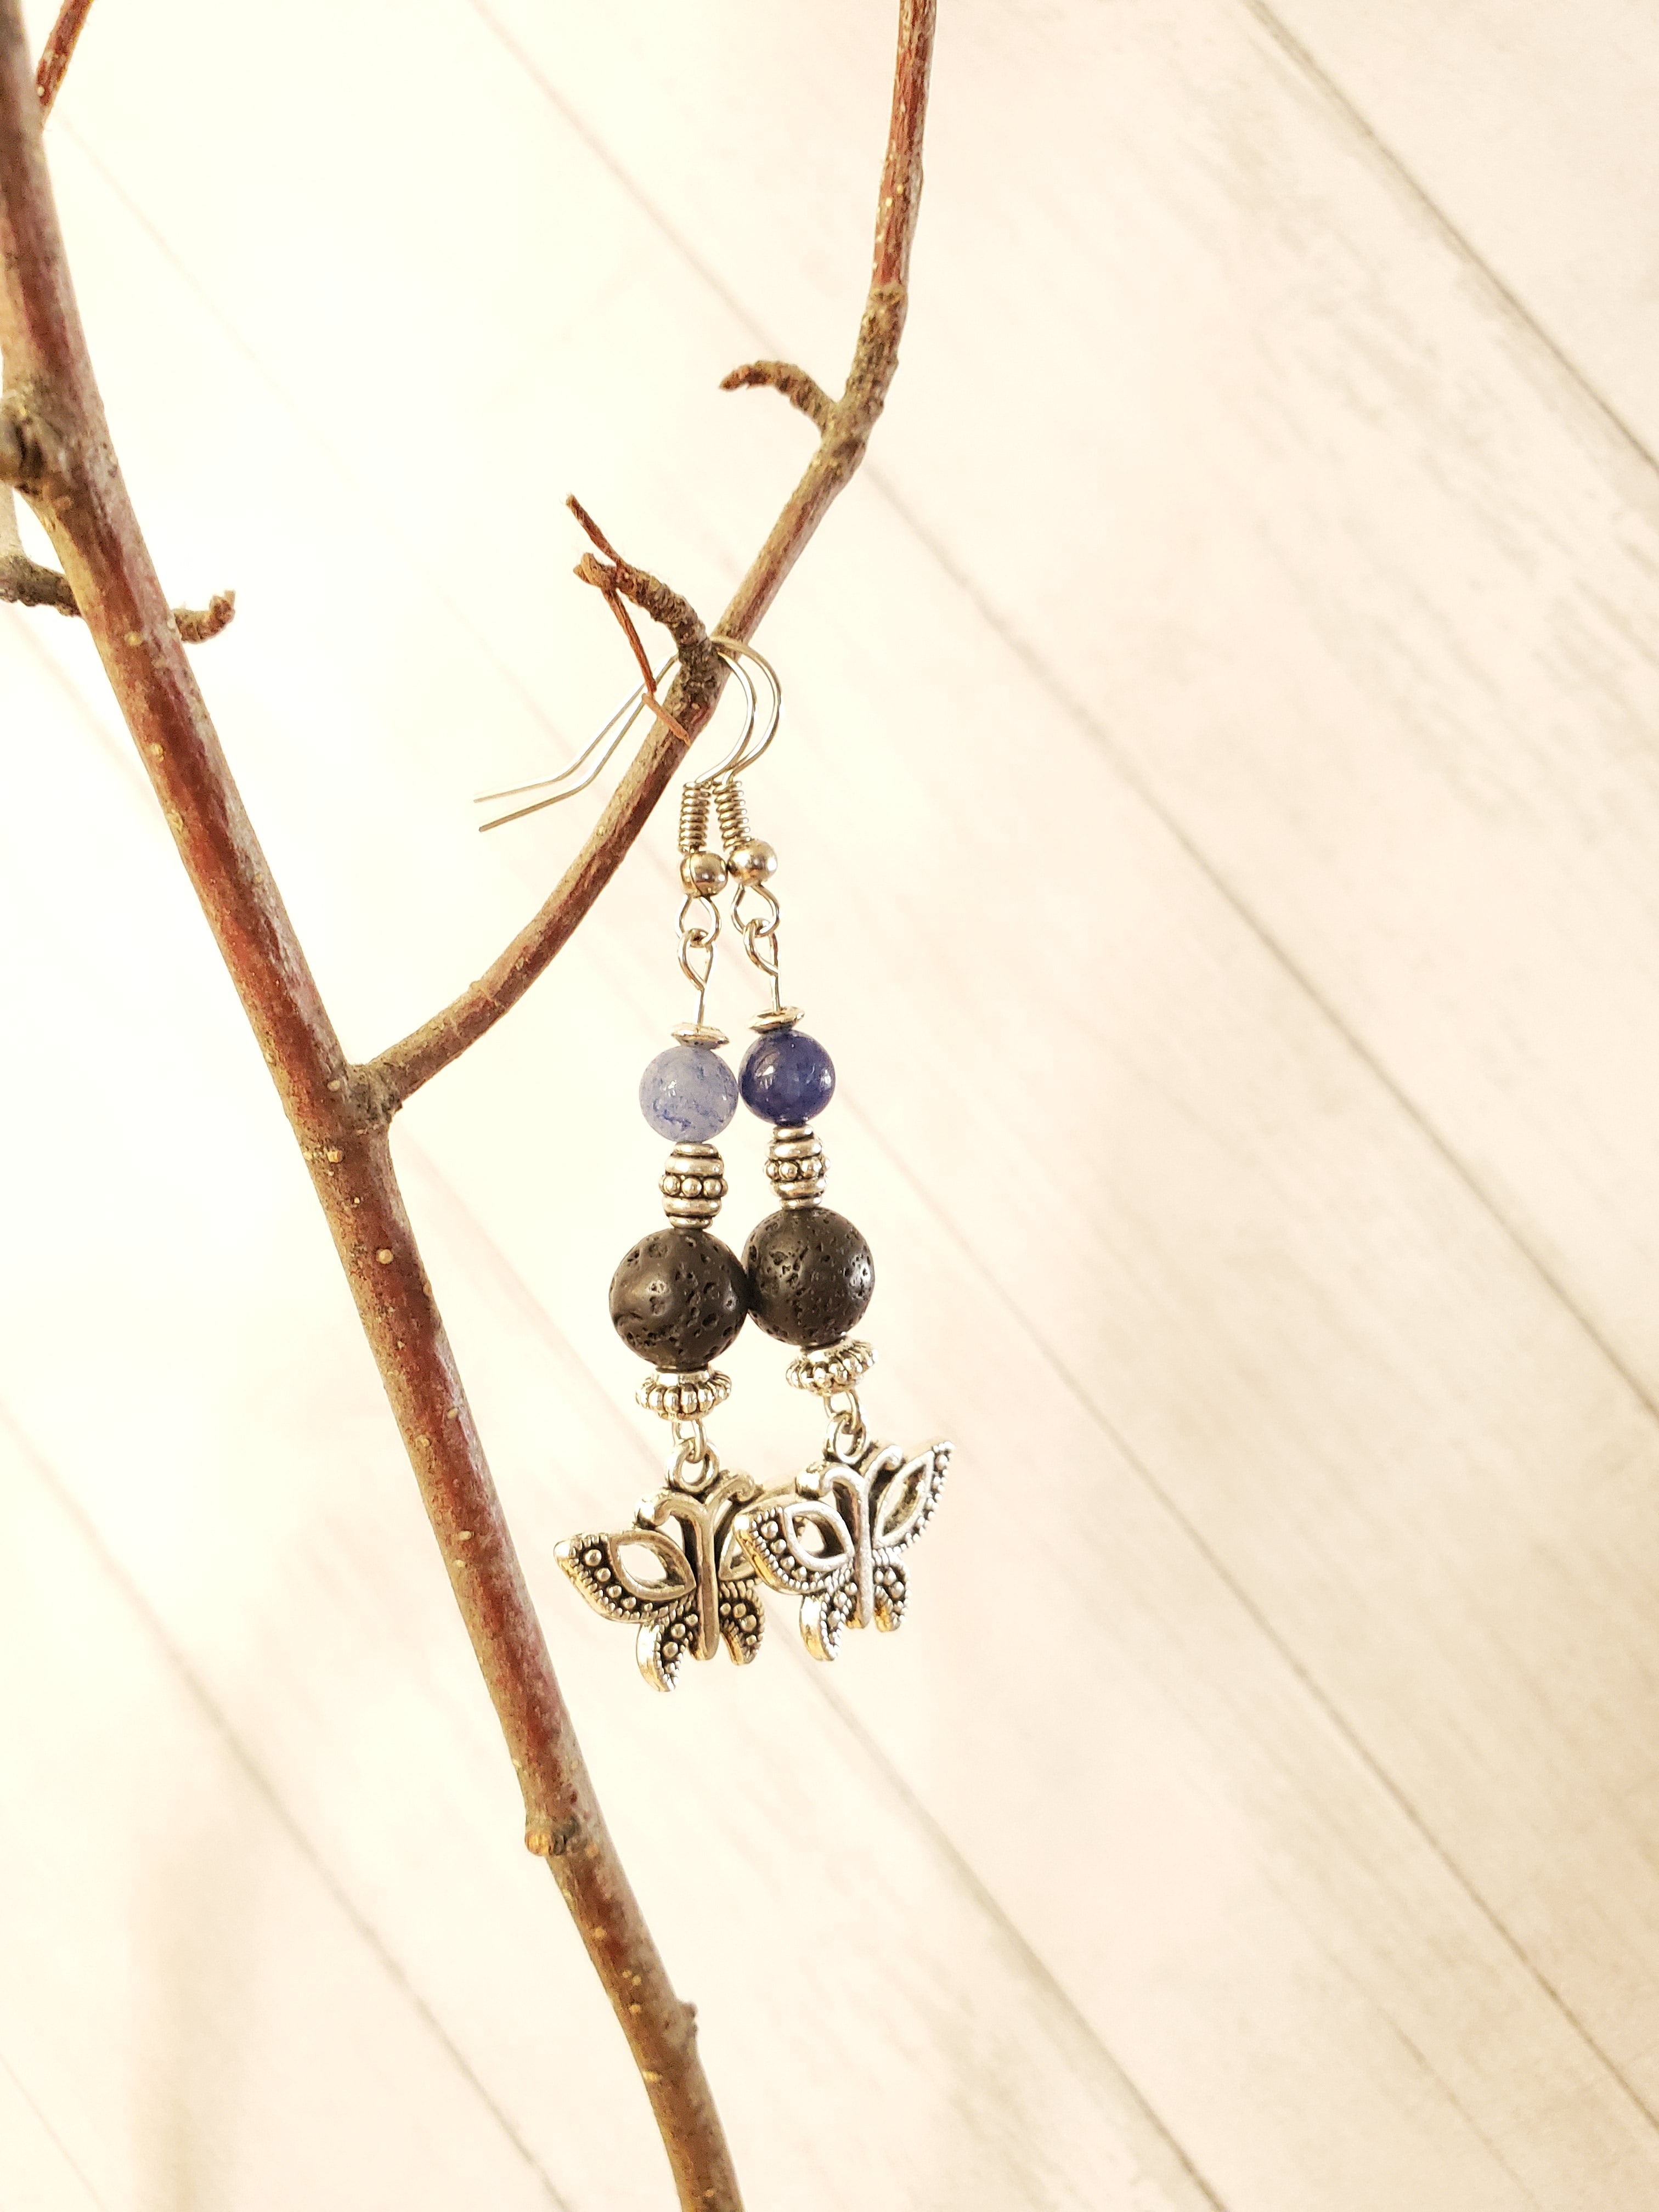 Butterfly with Blue Aventurine Lava Bead Diffuser Earrings